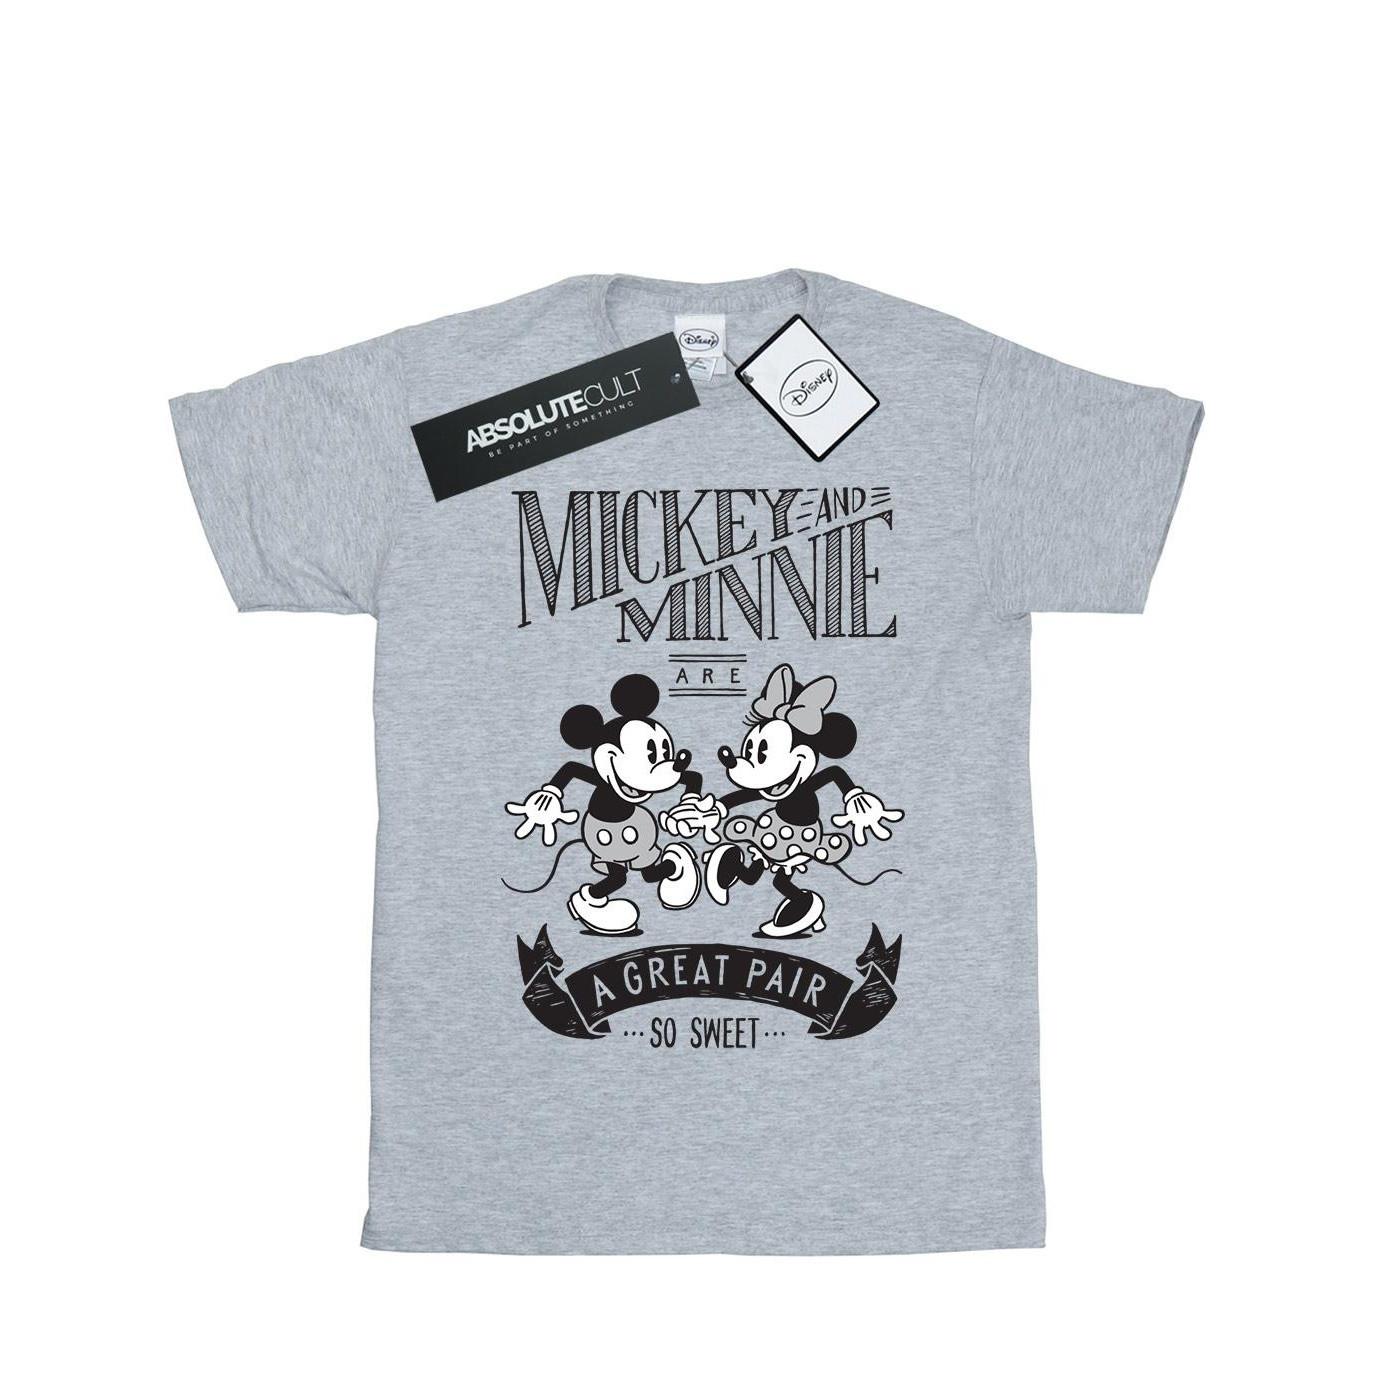 Disney  Tshirt MICKEY AND MINNIE MOUSE GREAT PAIR 